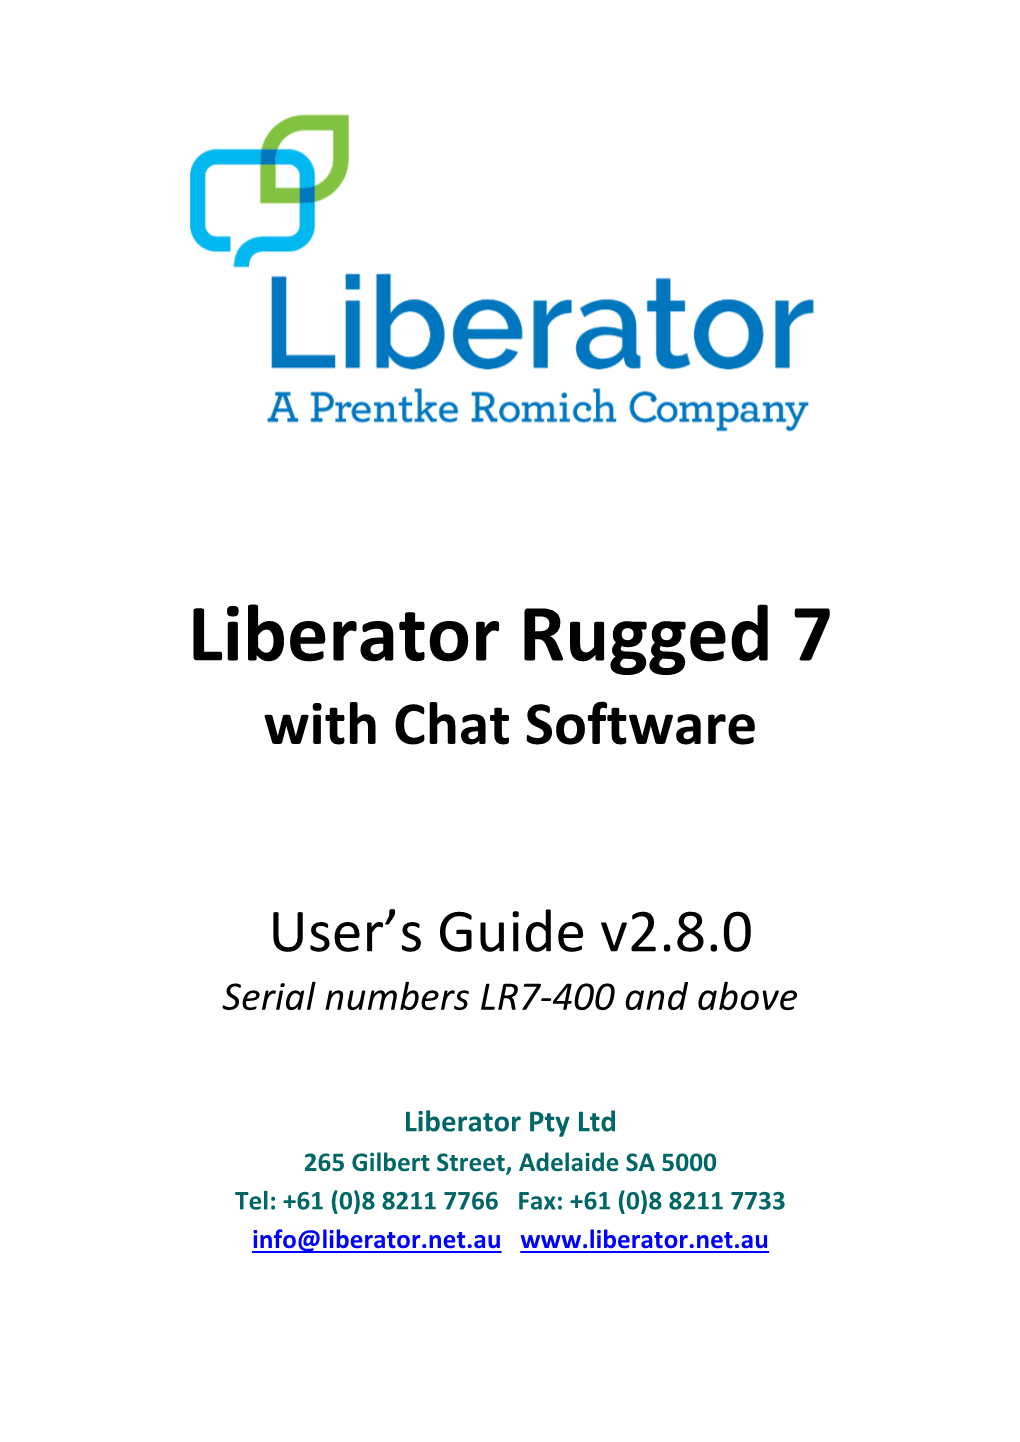 Liberator Rugged 7 with Chat Software